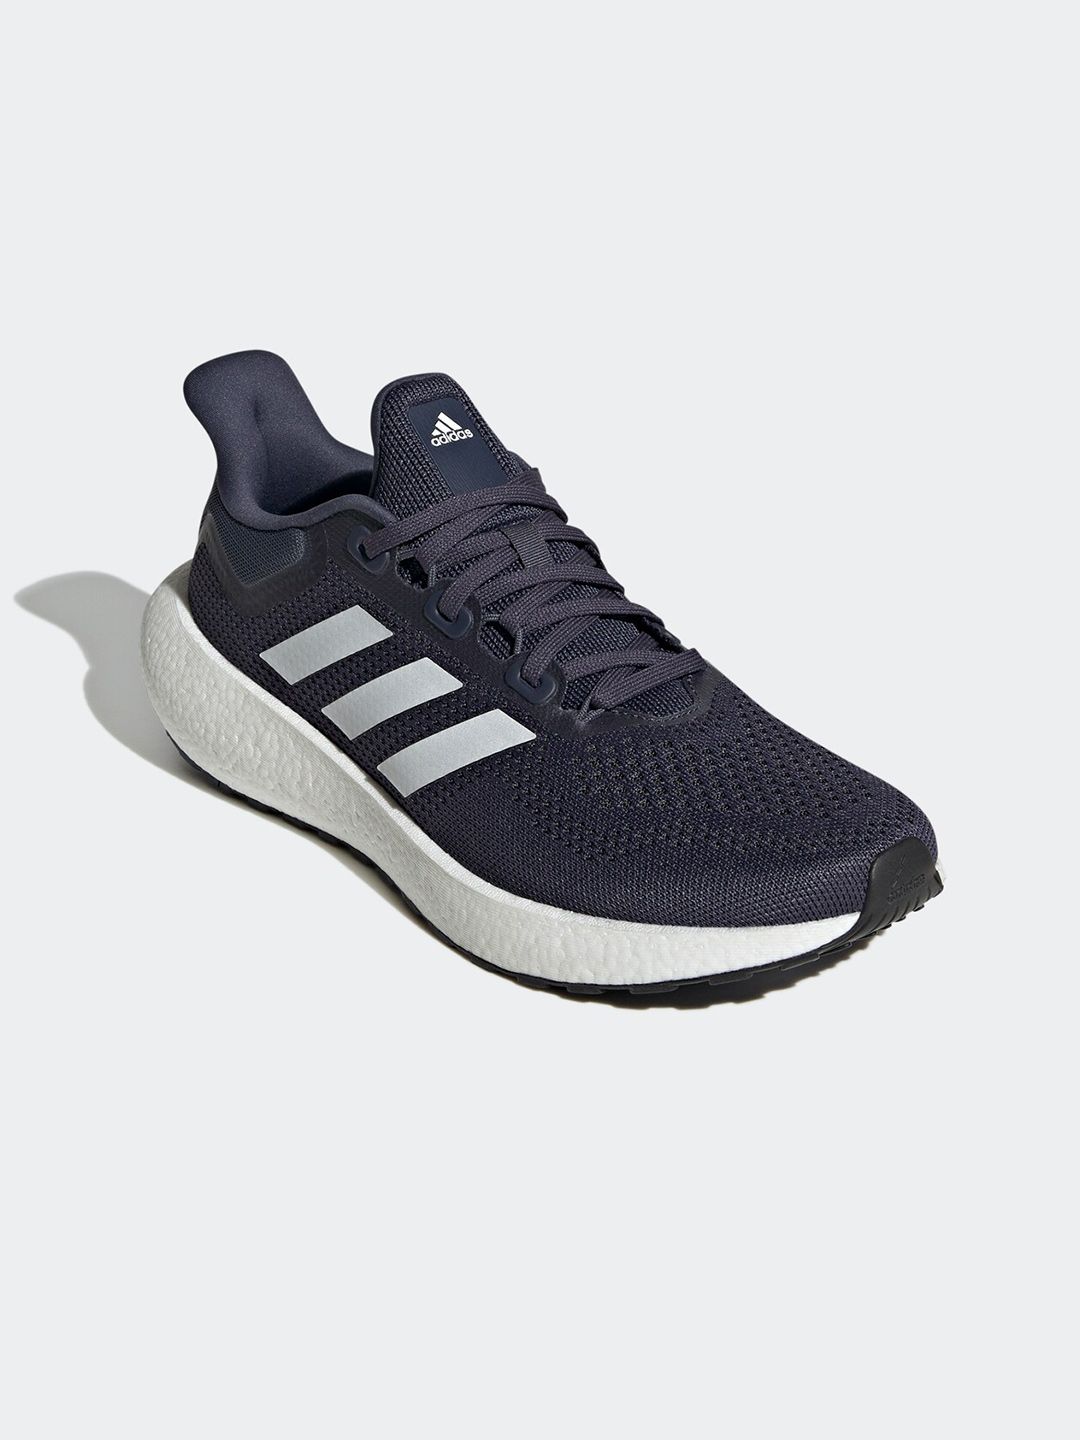 ADIDAS PUREBOOST 22 Running Shoes Price in India